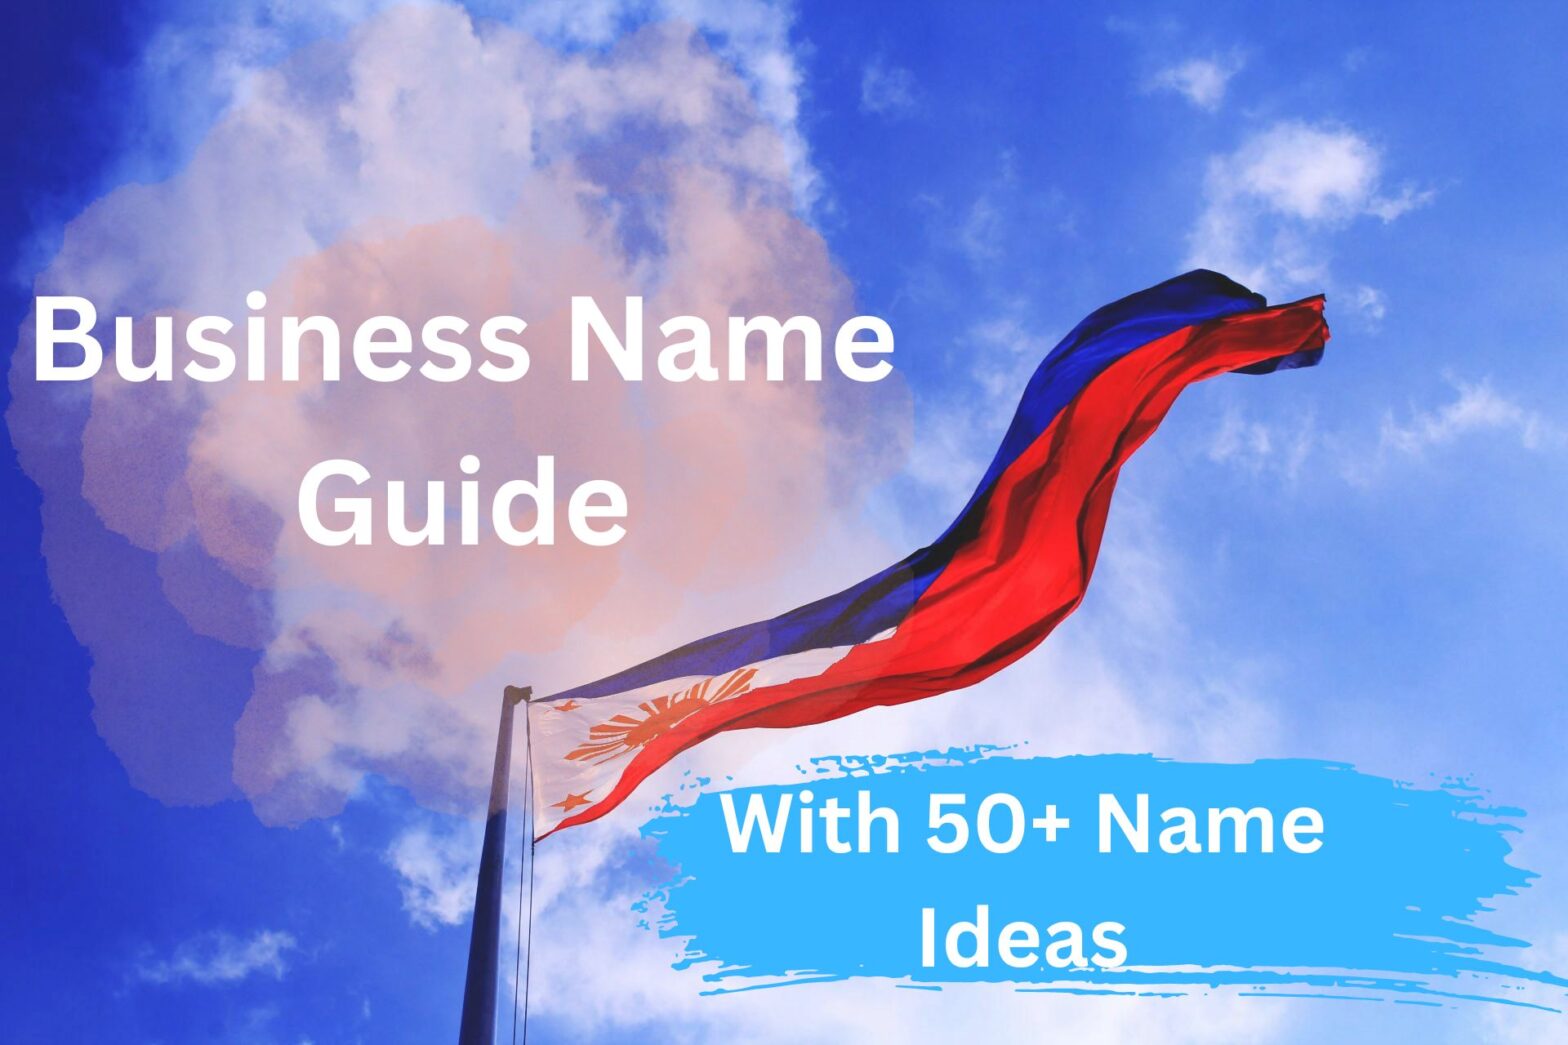 Business name guide